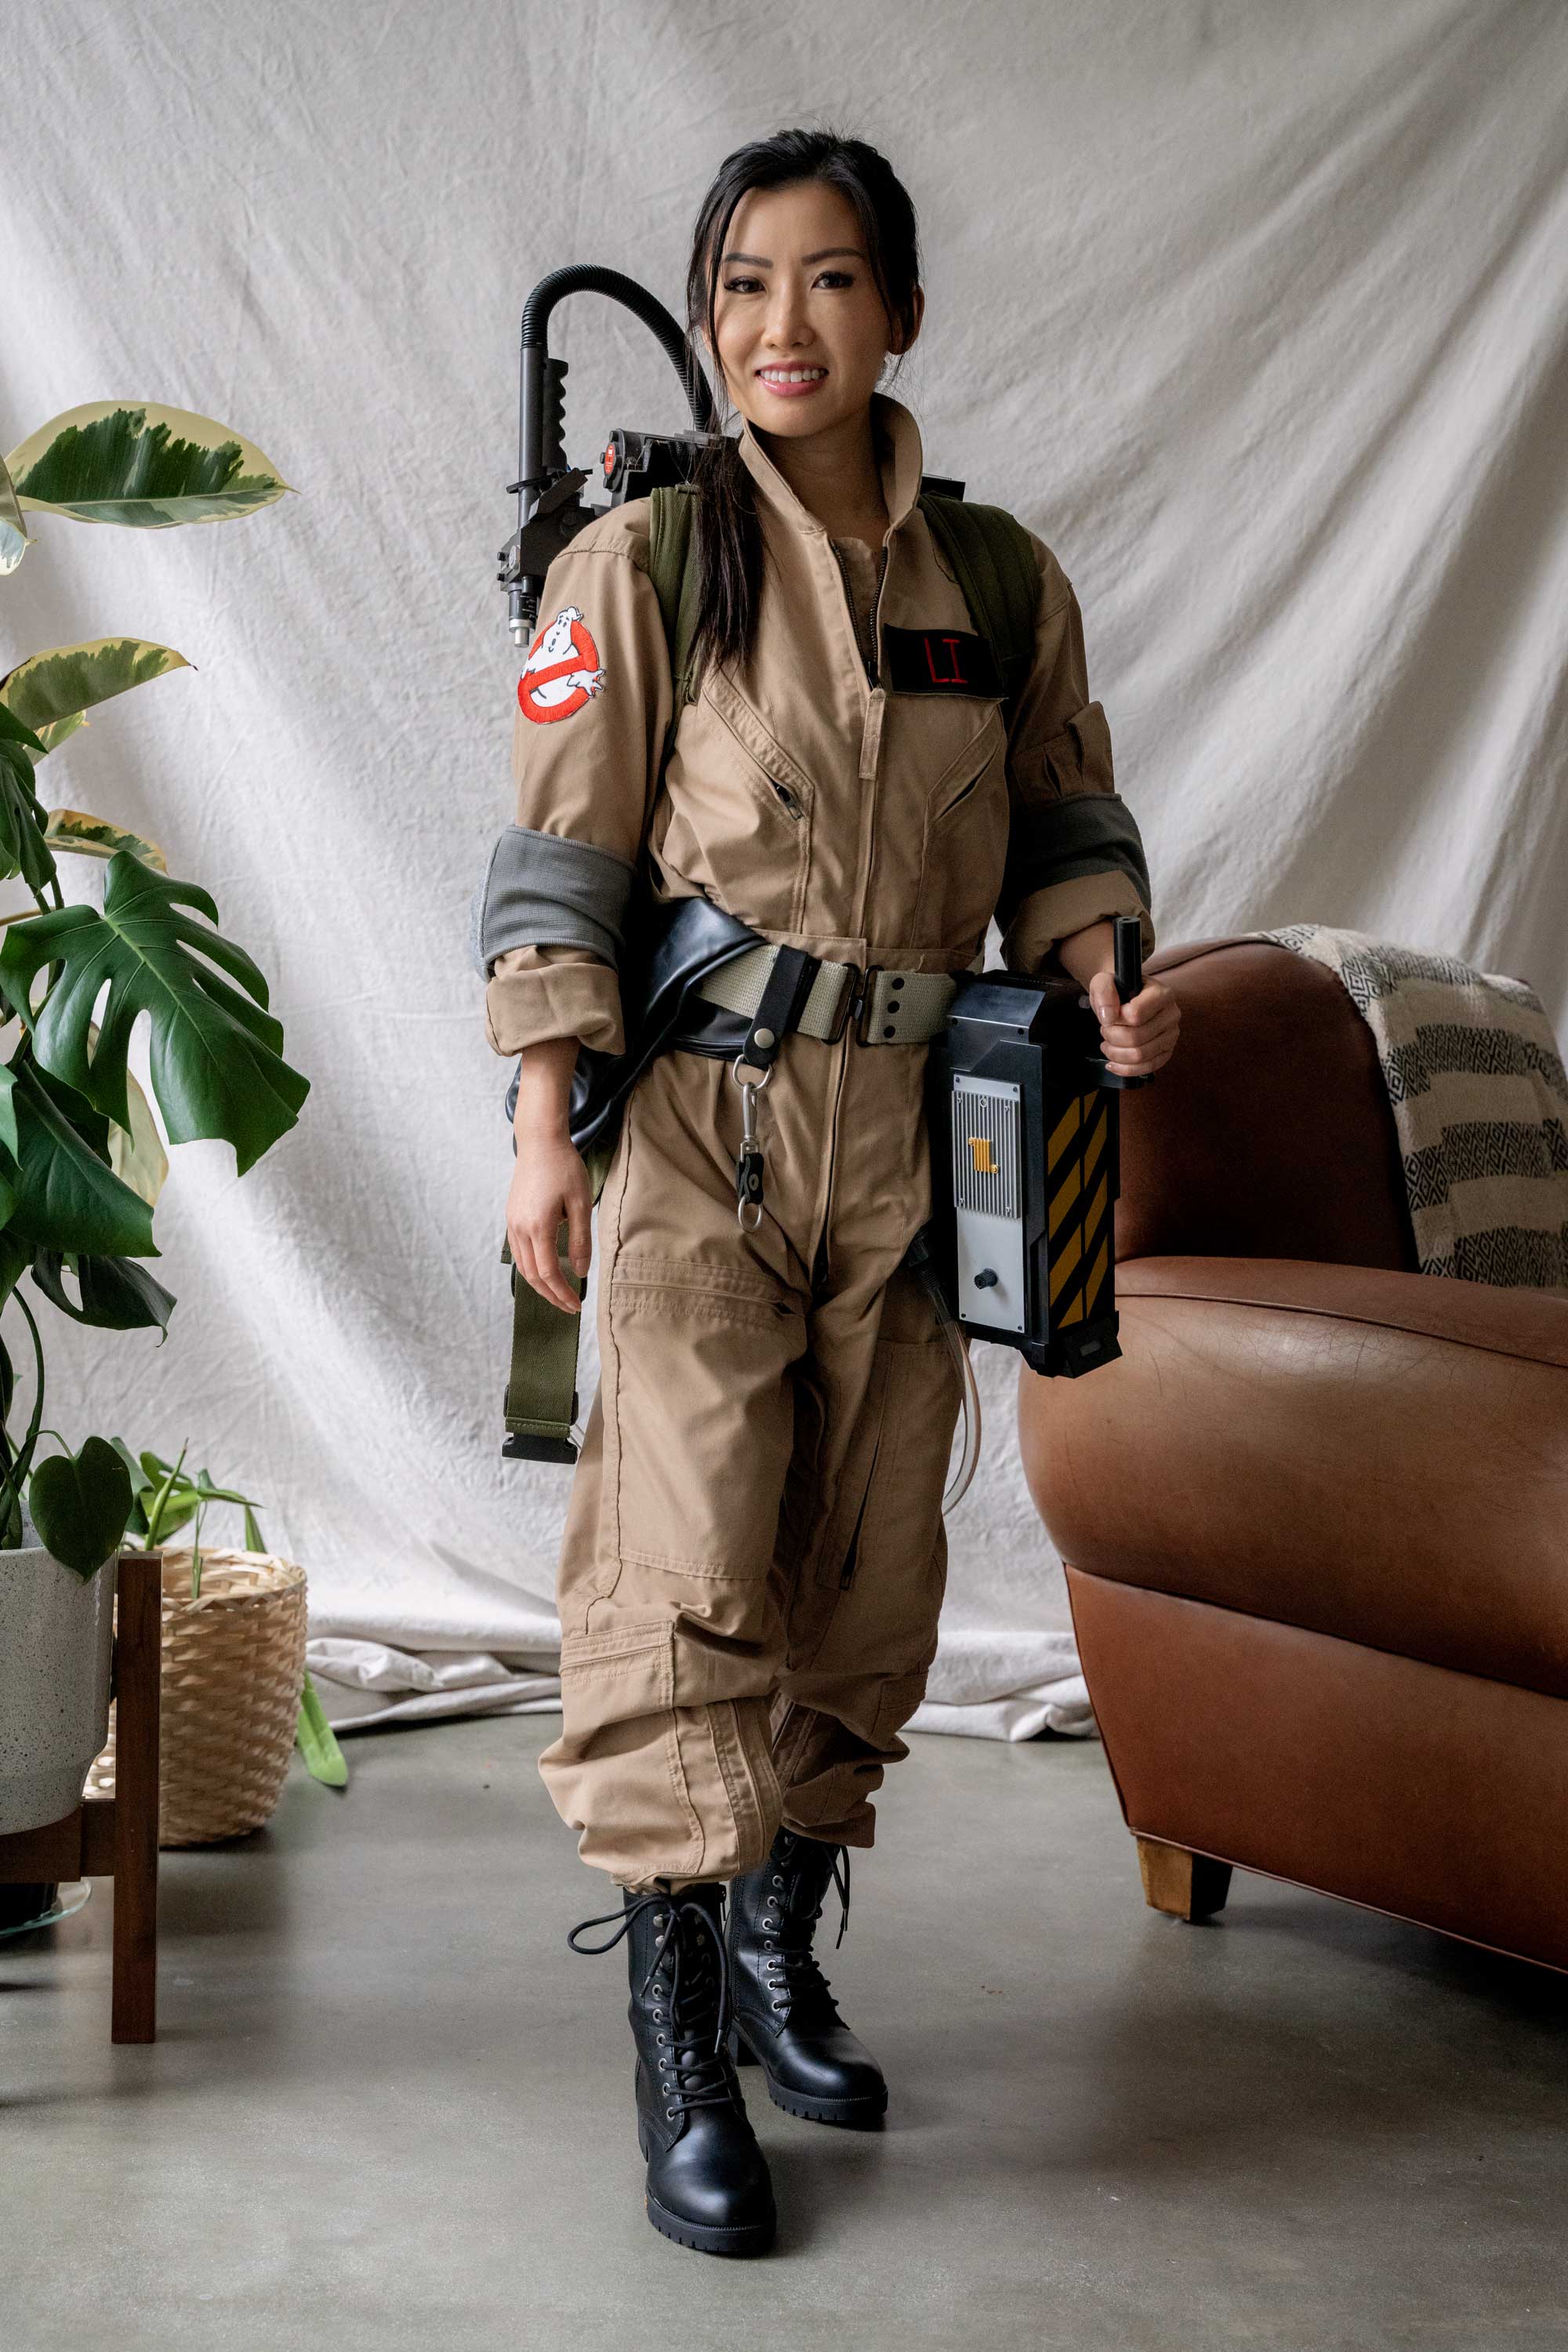 woman ghostbusters costume for small, petite or children